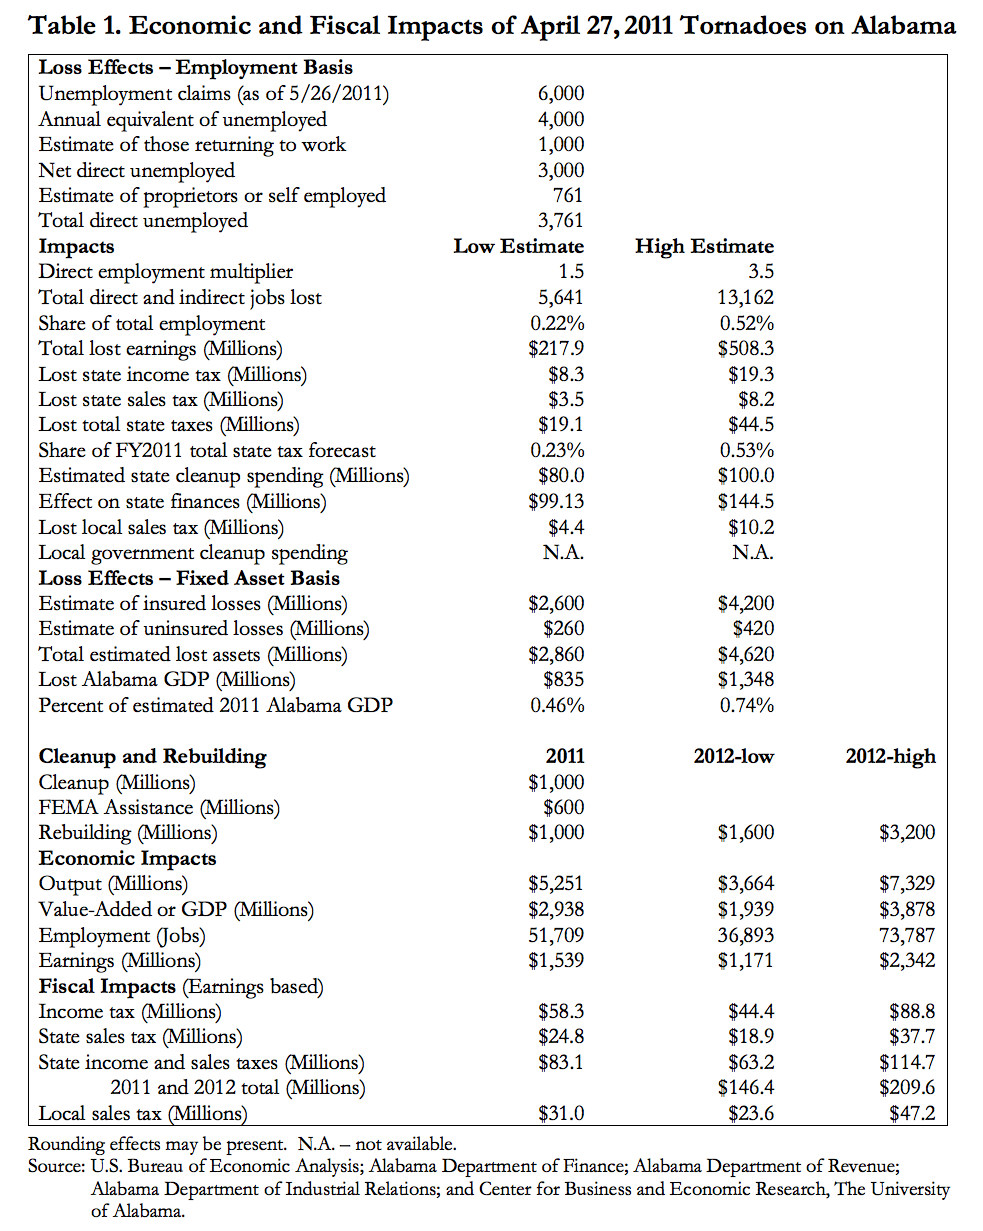 Table 1. Economic and Fiscal Impacts of April 27, 2011 Tornadoes on Alabama